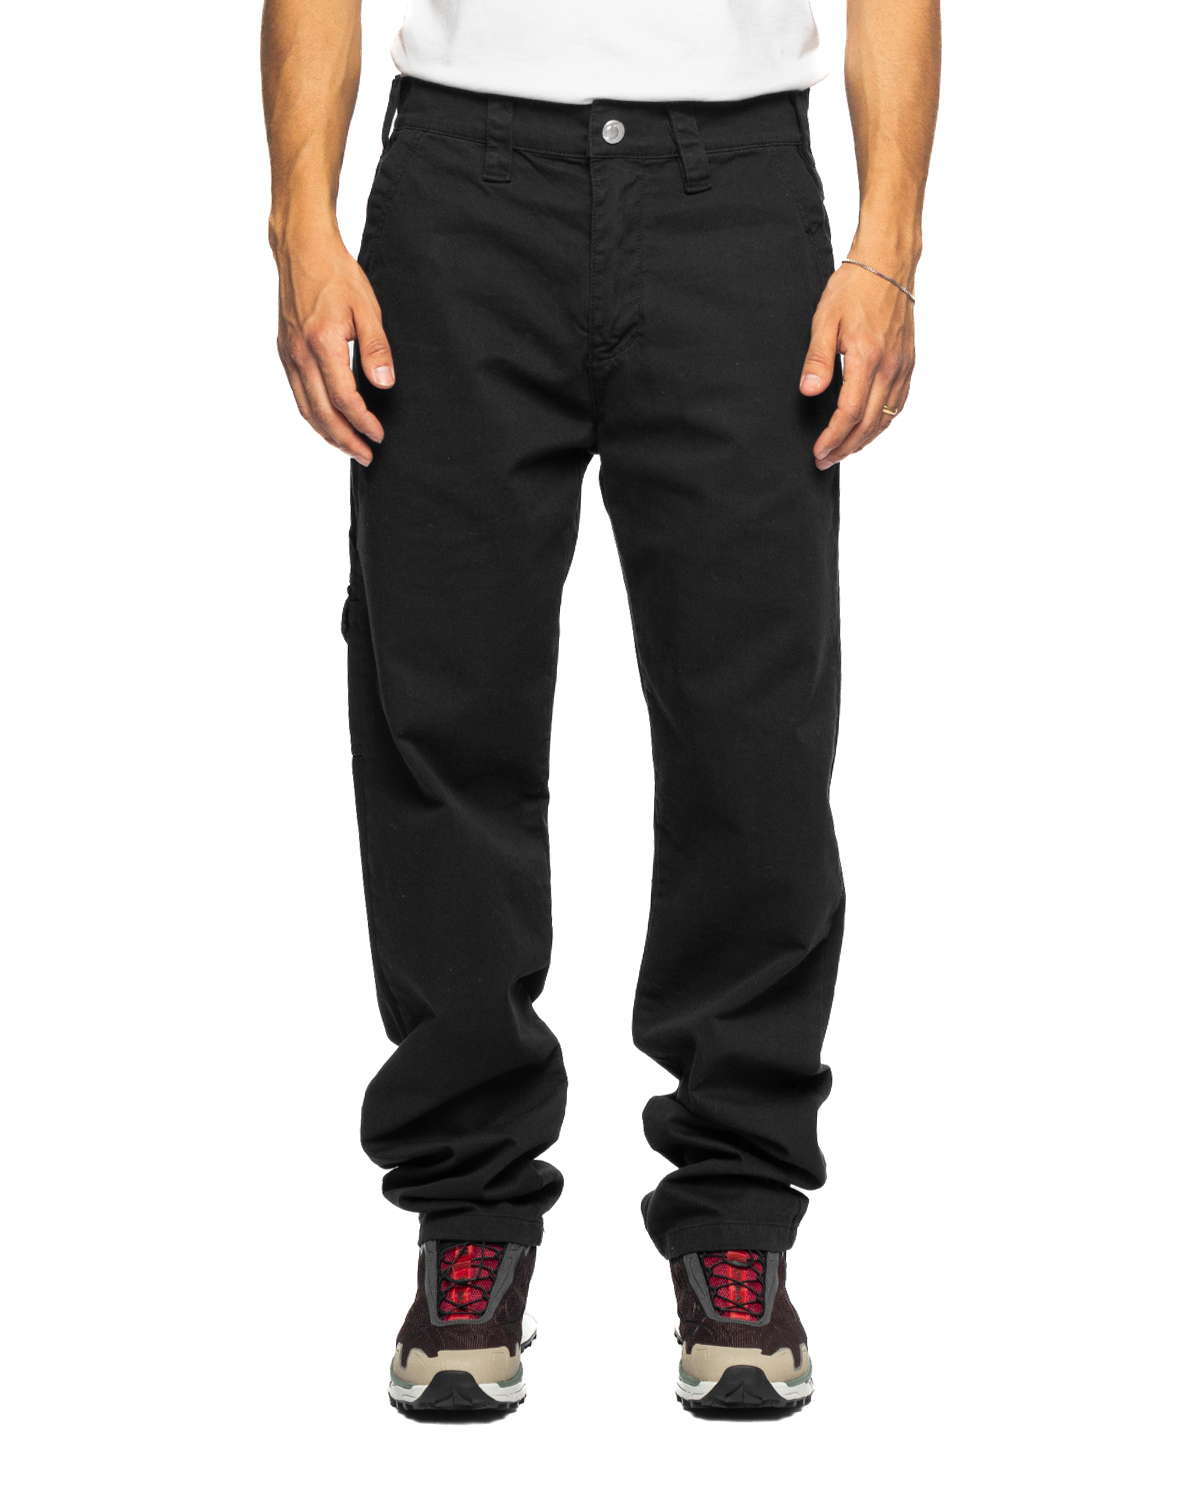 Utility Pant Washed Black Duck Cotton